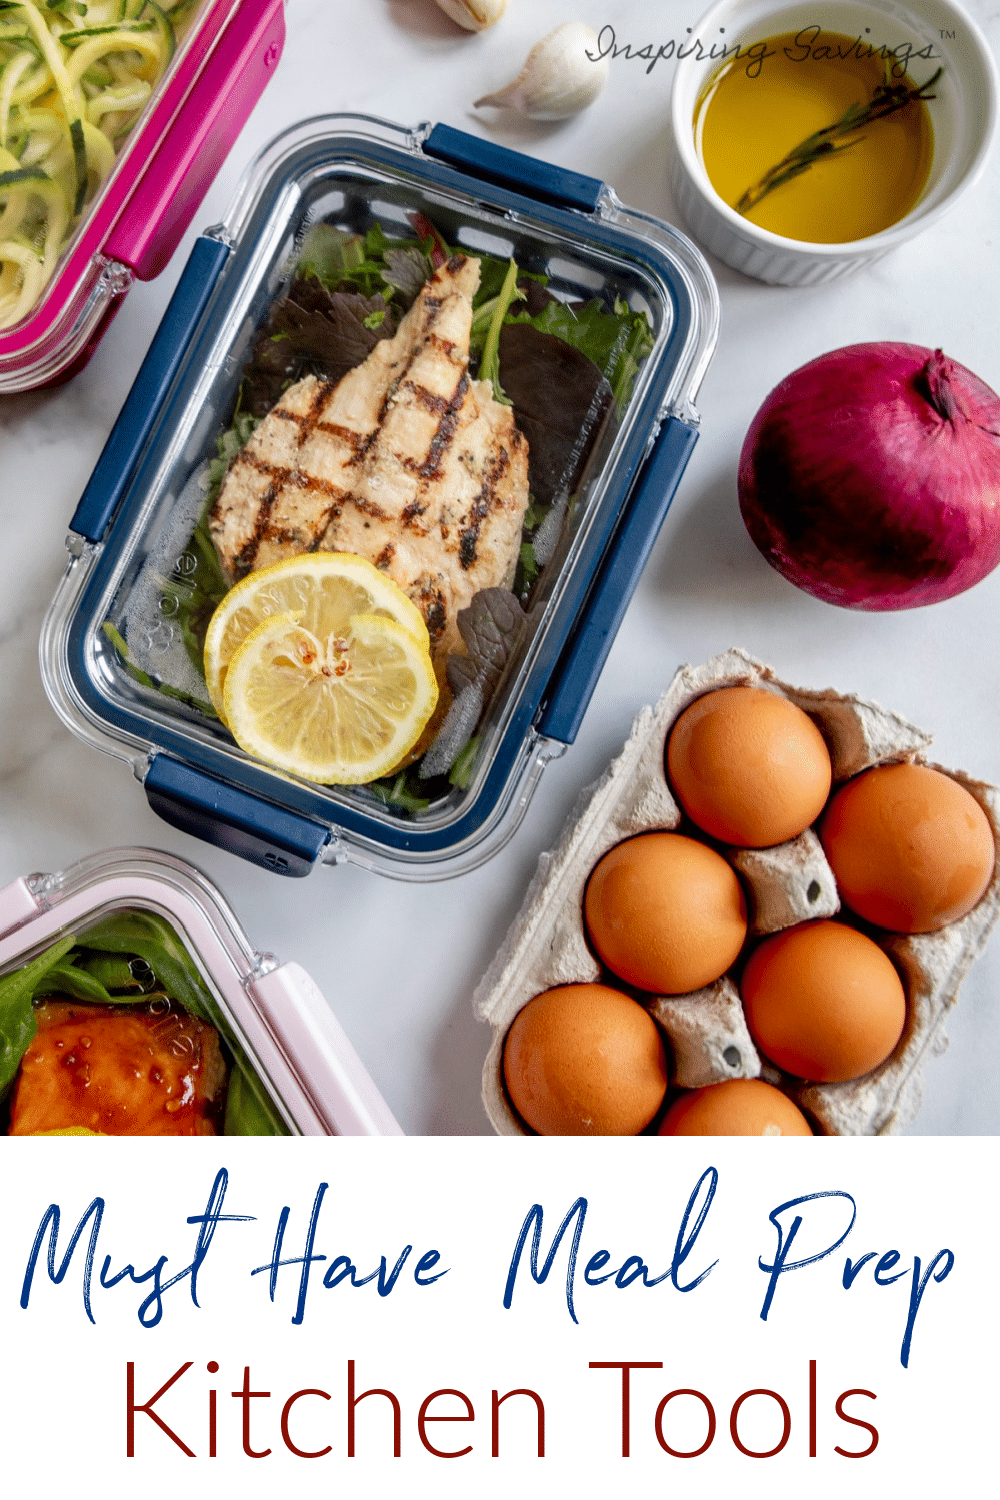 16 Tools to Help You With Meal Prep